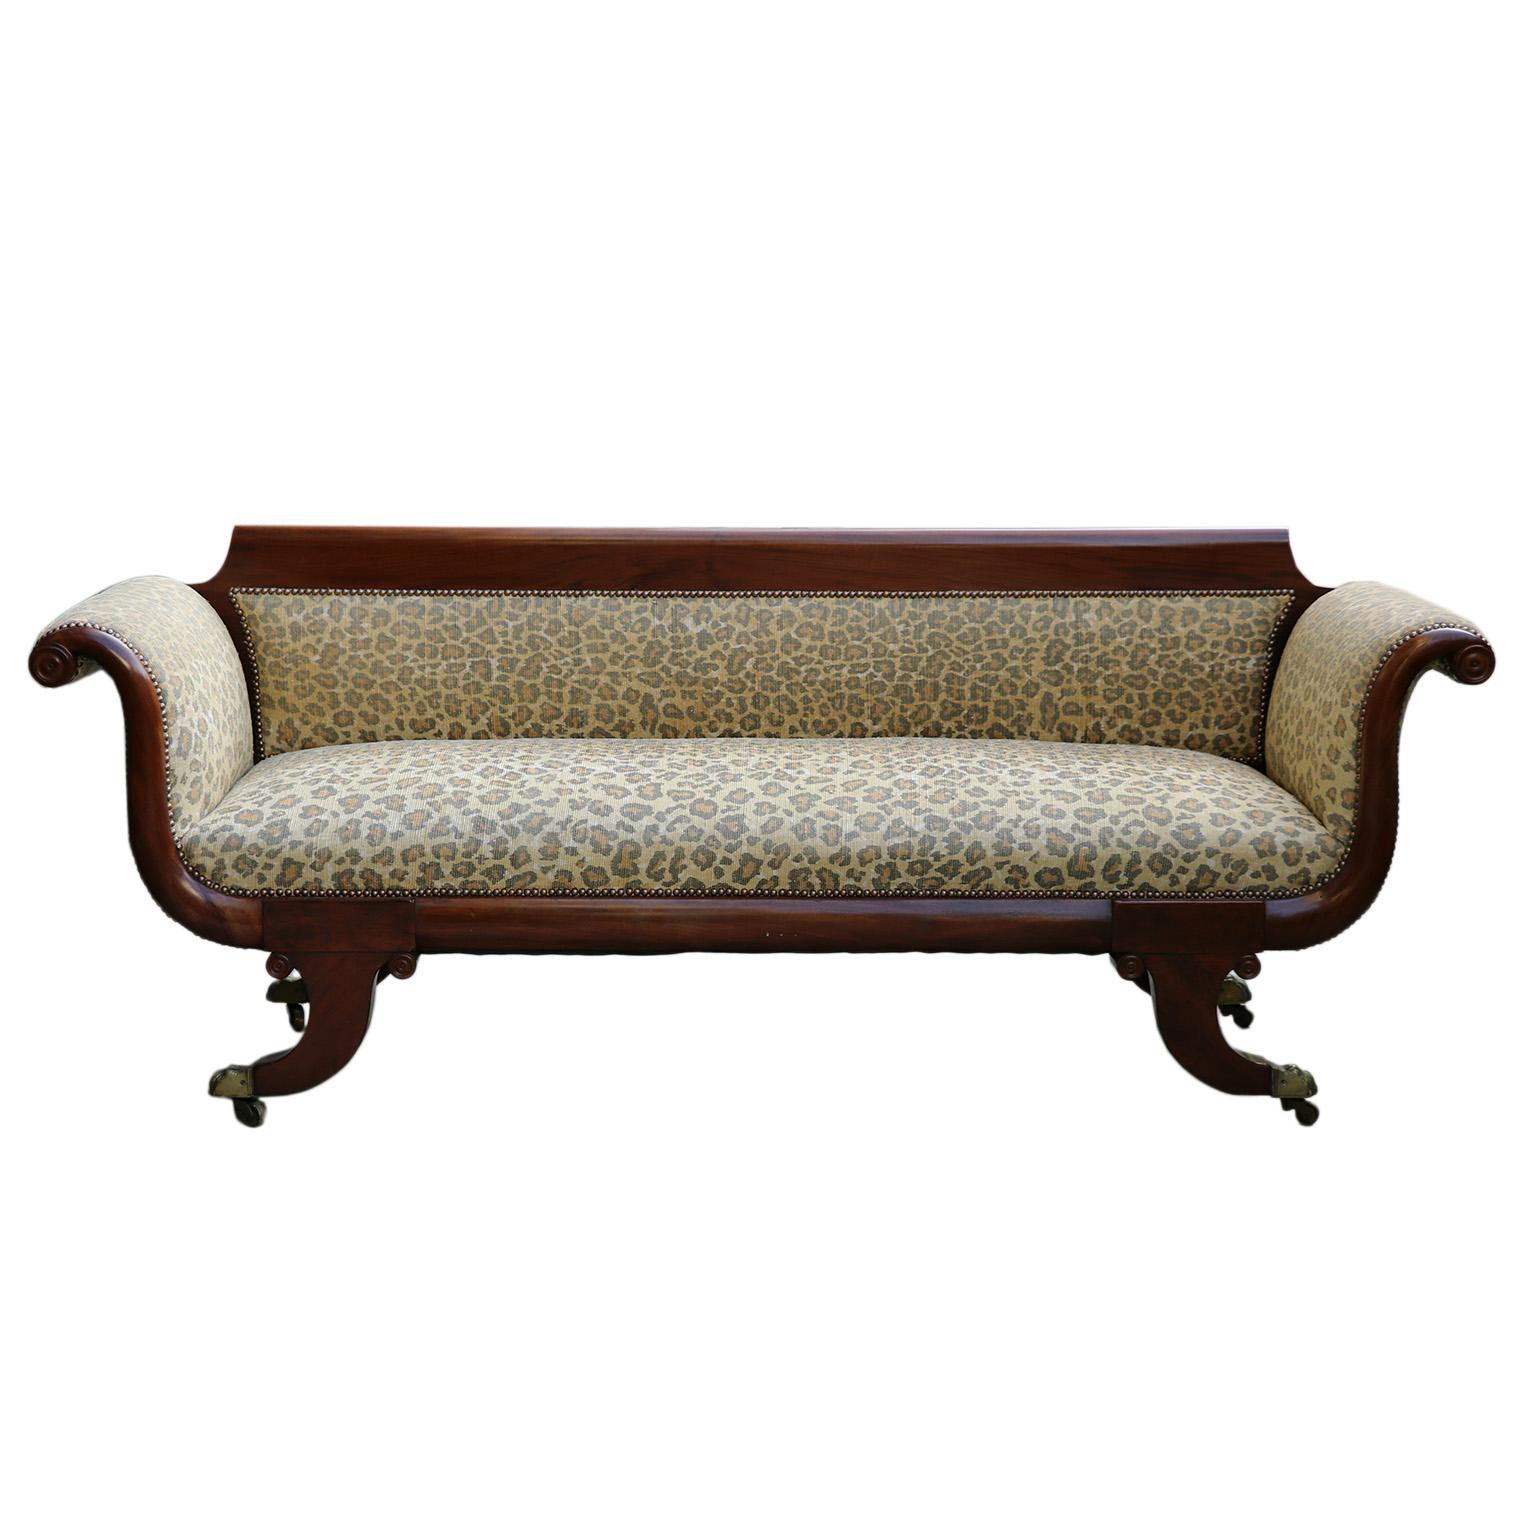 A vintage animal pattern chaise lounge on brass footed casters. With an arm height of 30